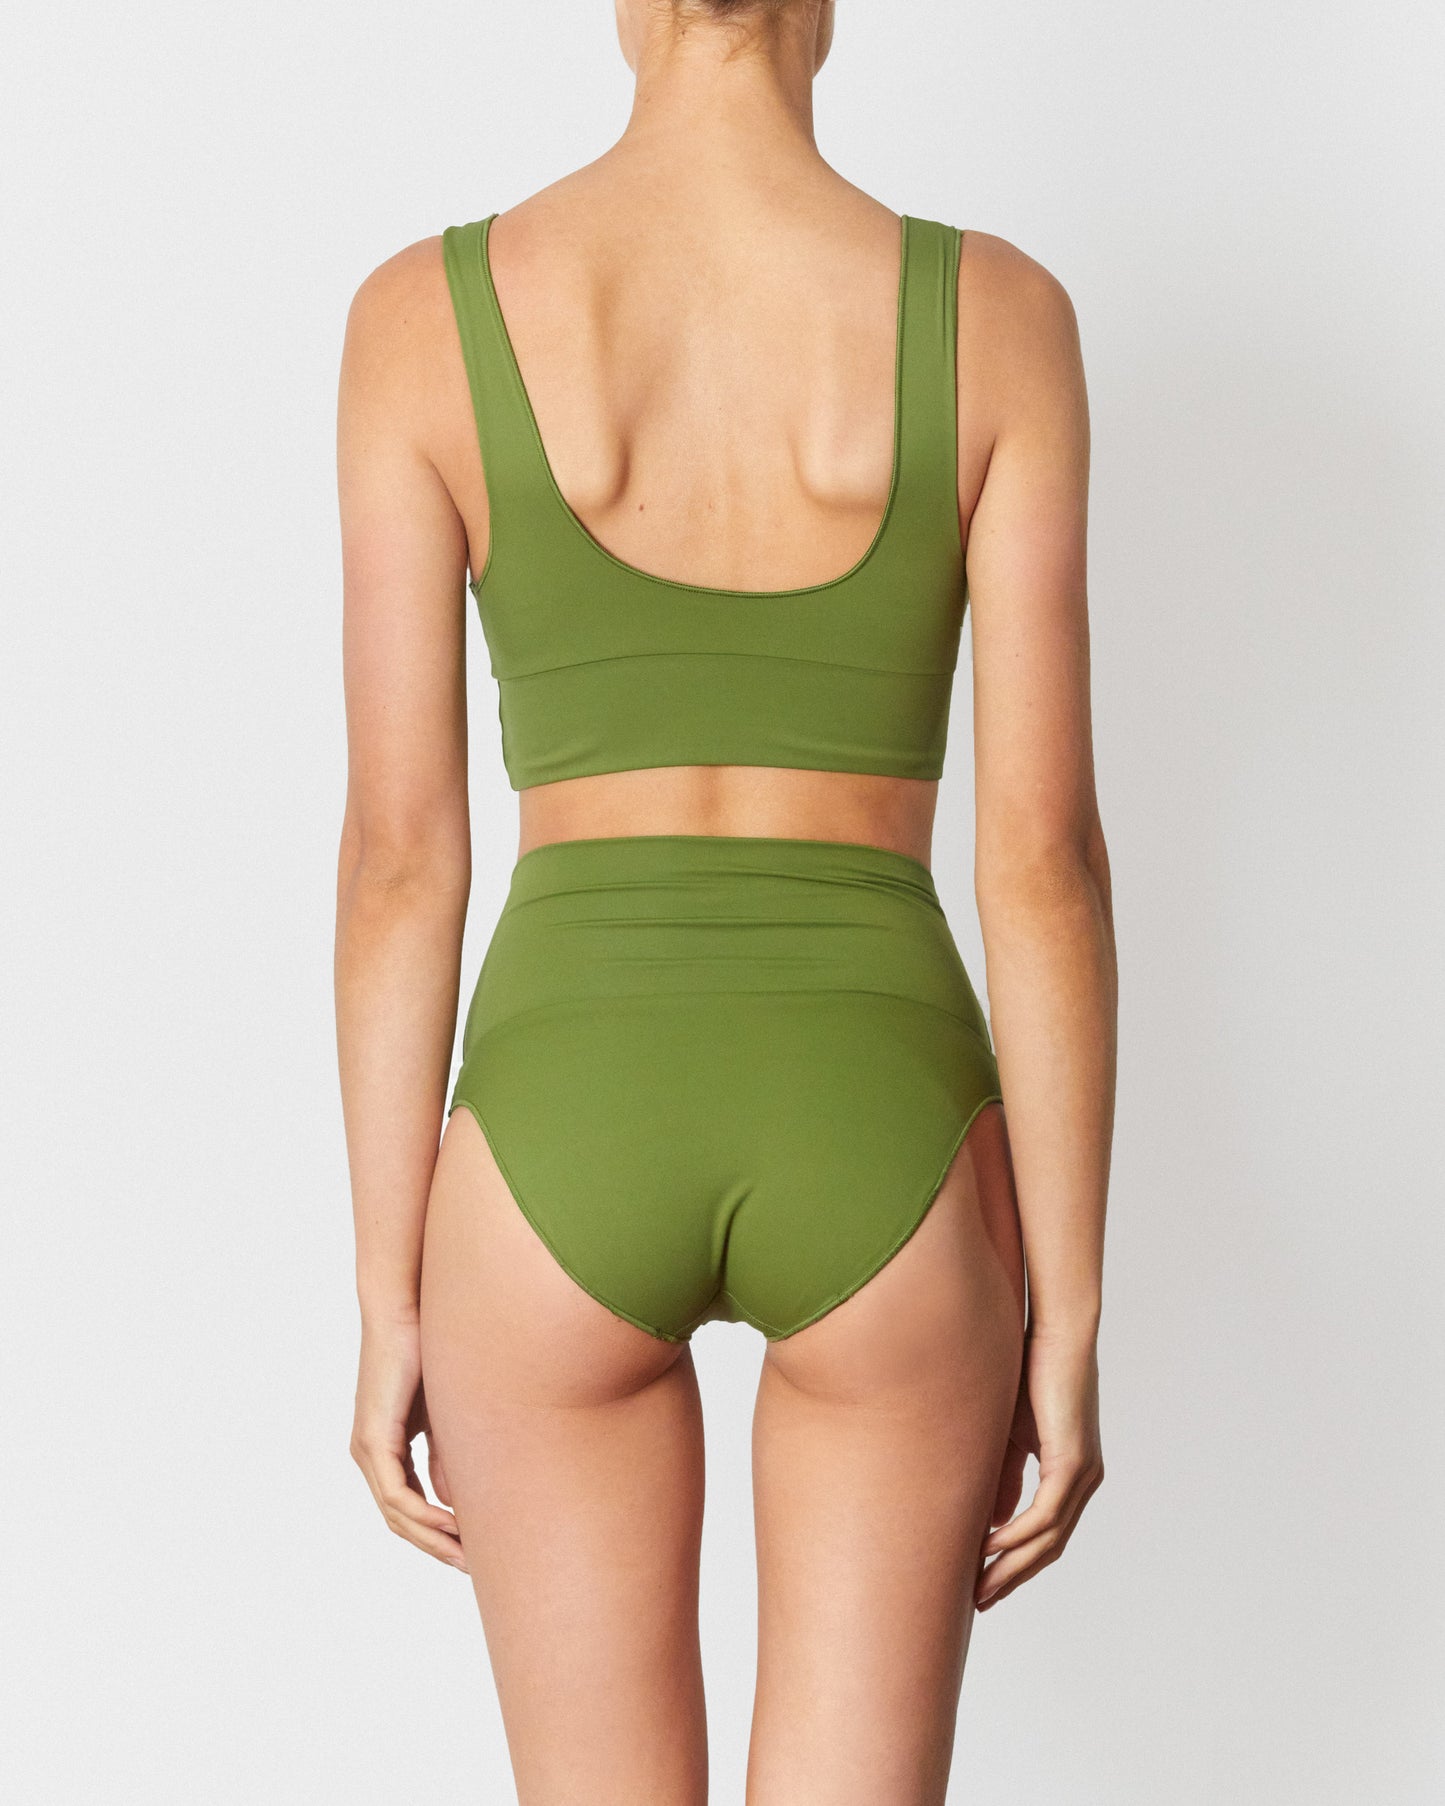 On body back of the Contour High Waist Pant - Pesto